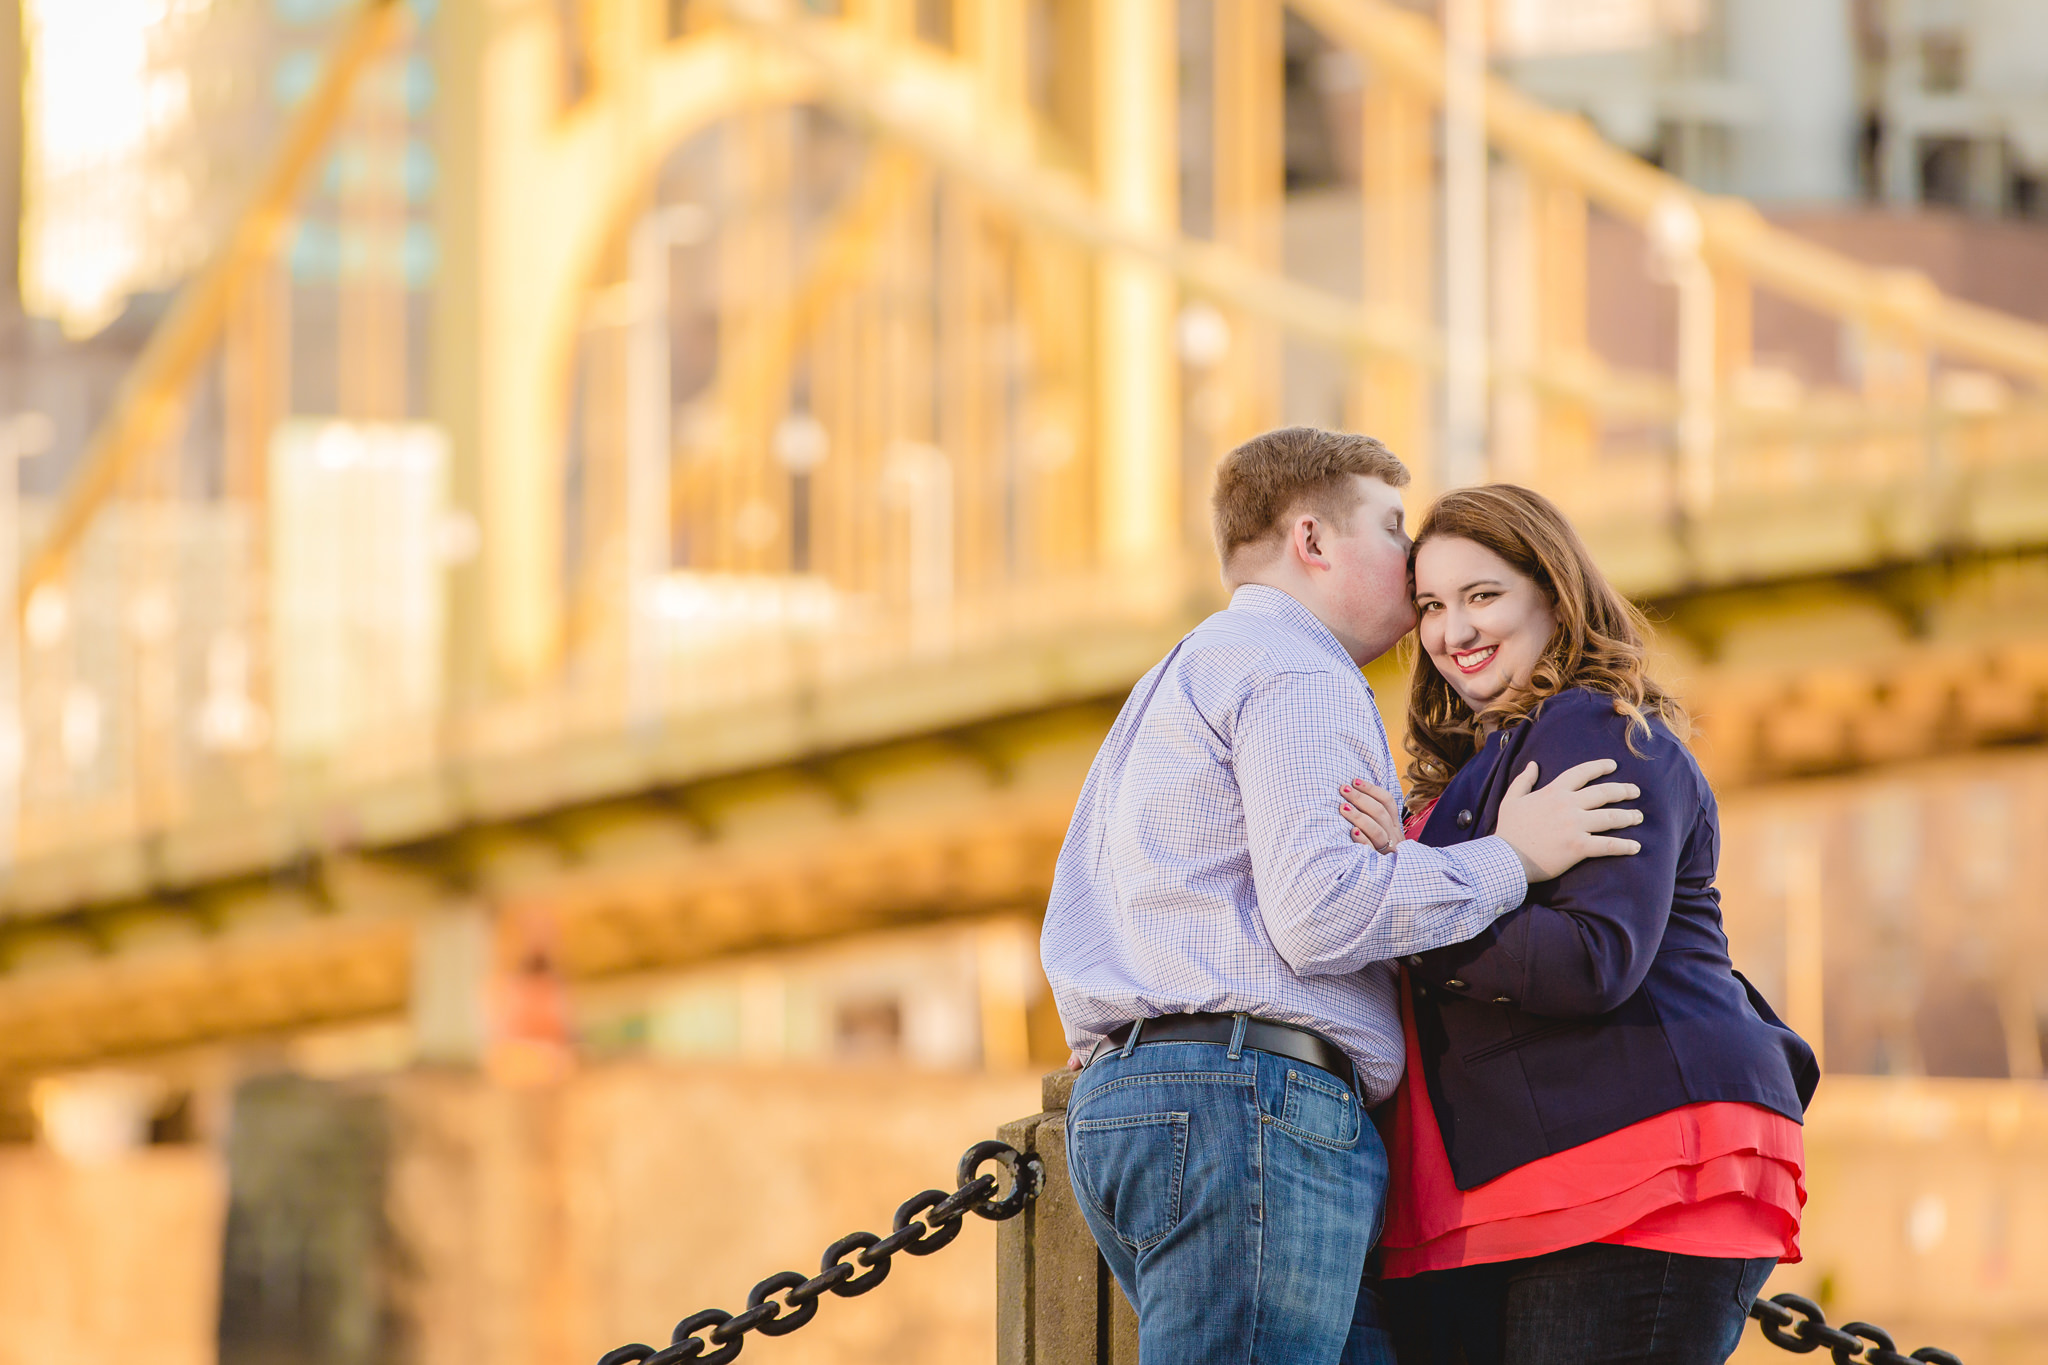 Bride-to-be gets a kiss from her fiance on Pittsburgh's North Shore riverwalk